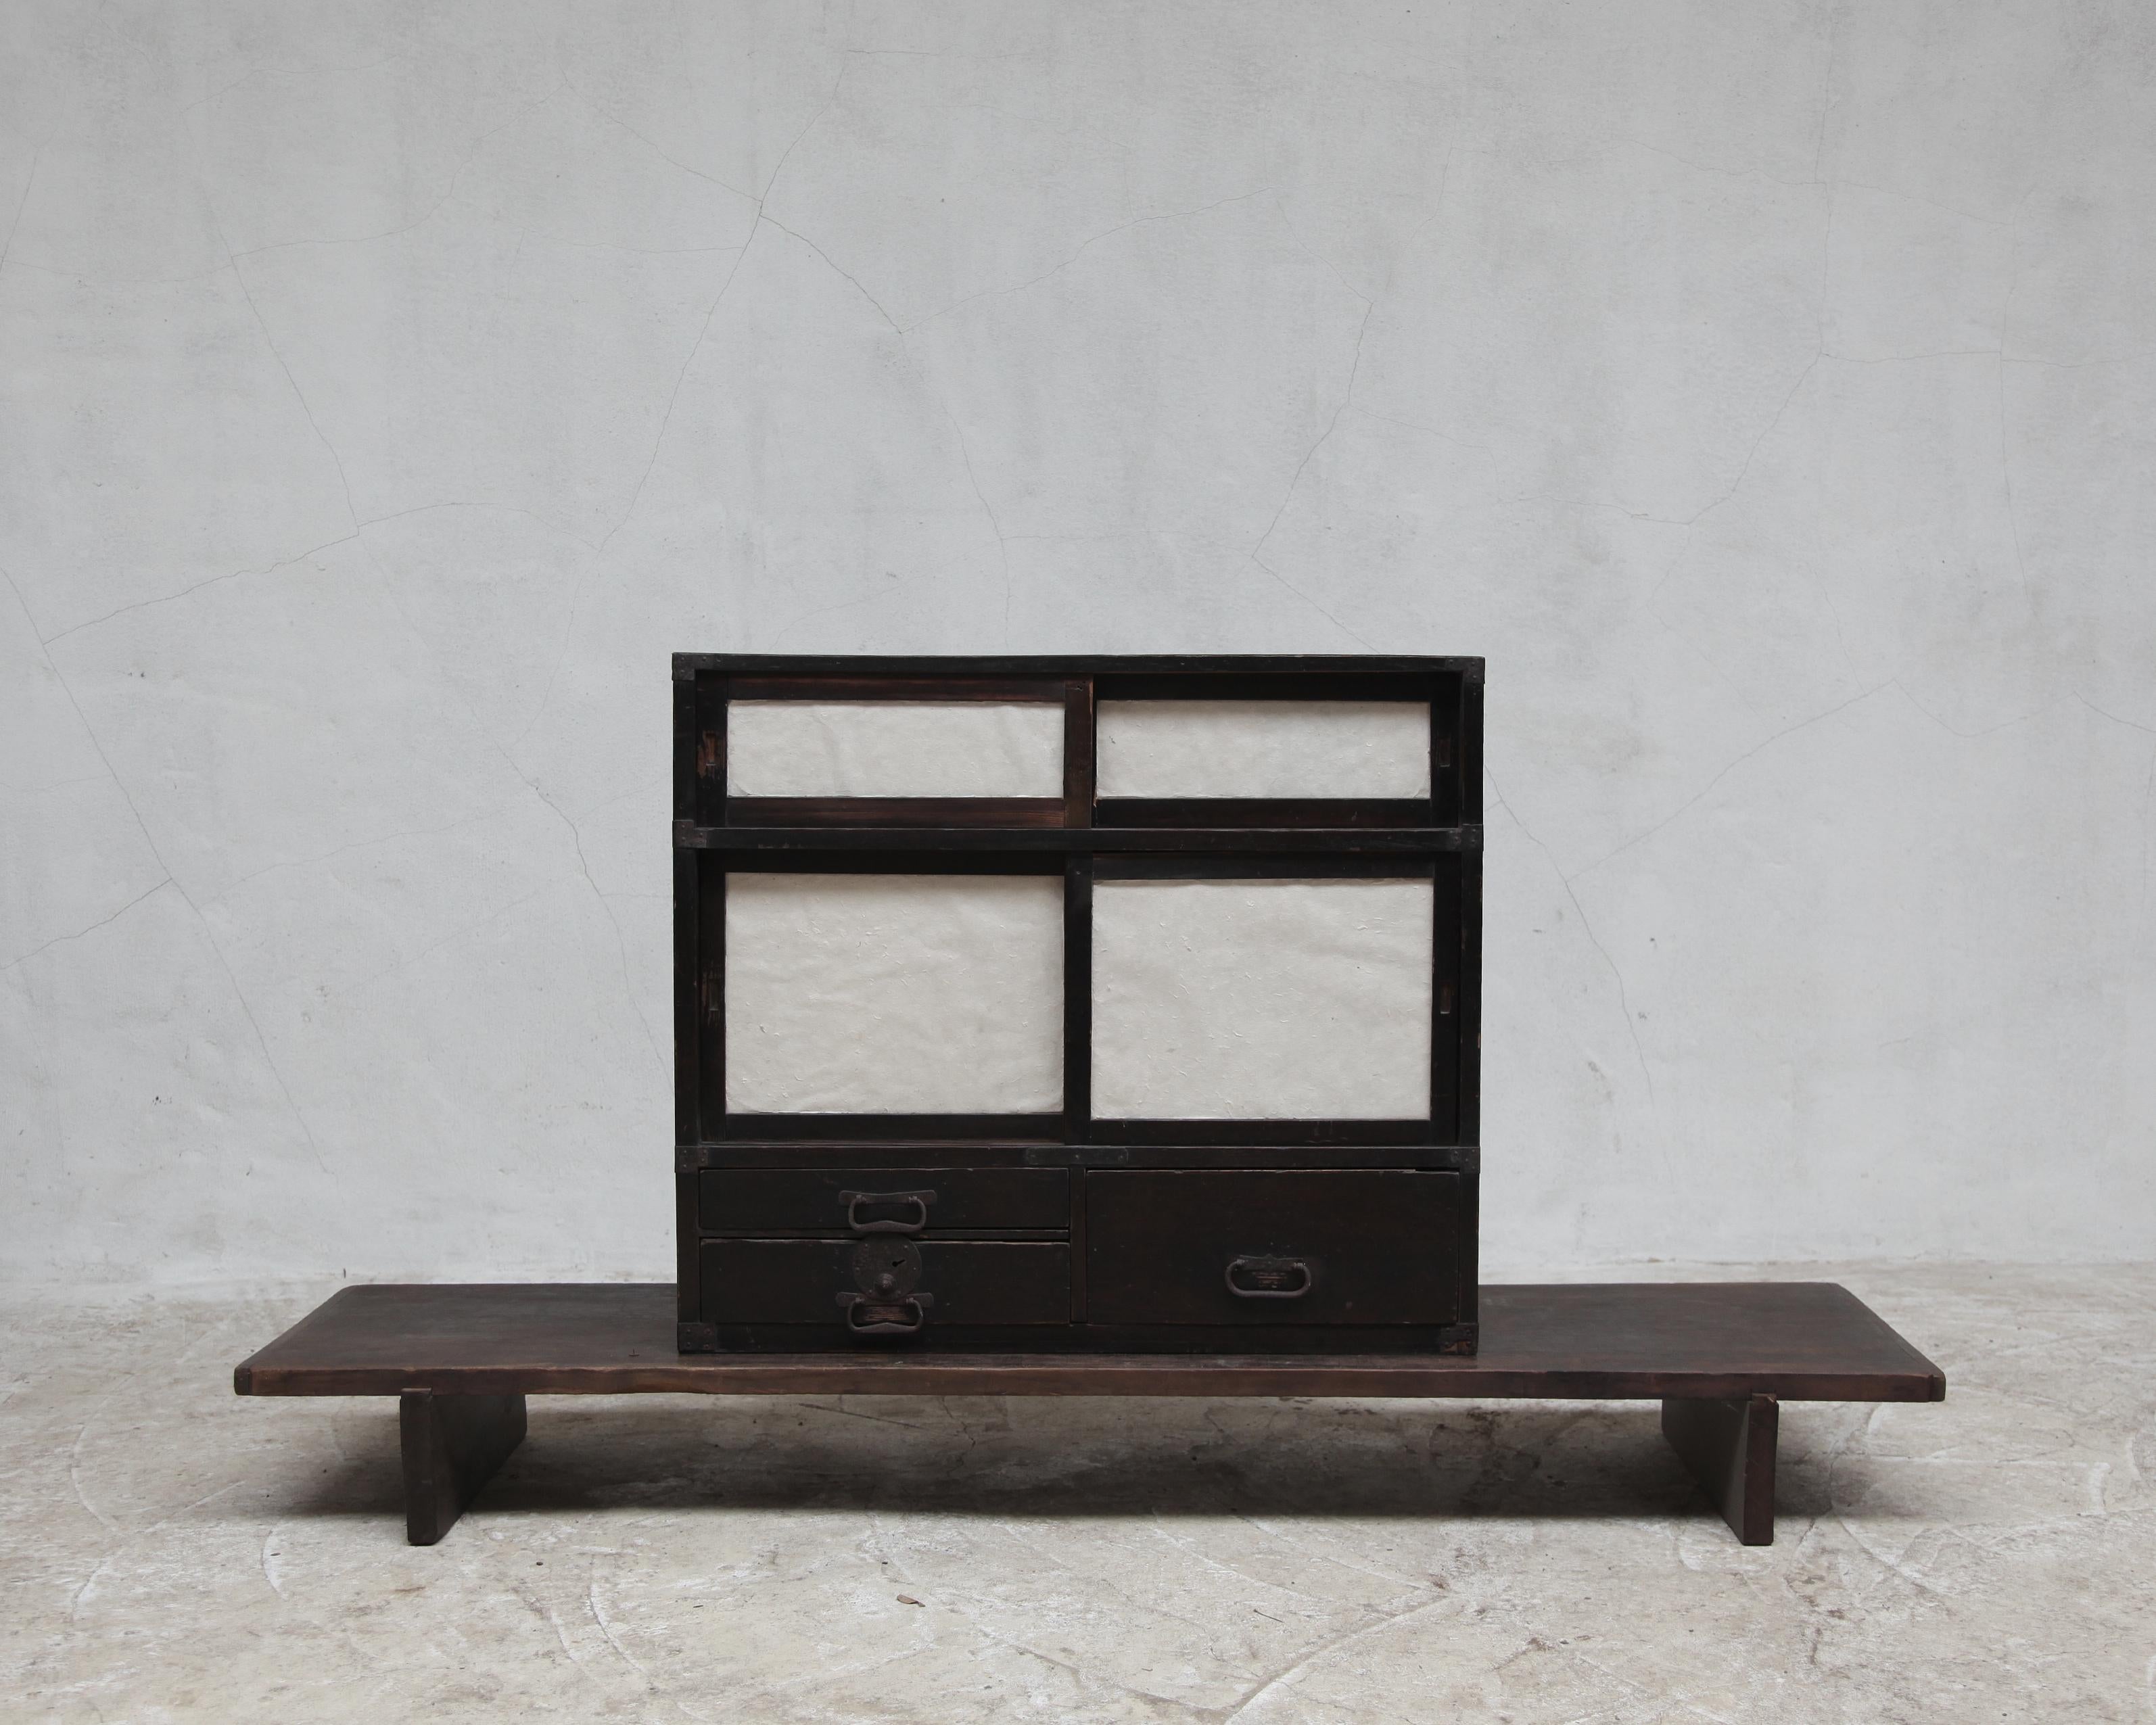 An early 19th C. Meiji period paper tansu.

Heavily patinated Japanese pine & cedar.

two sets of sliding doors with plenty of drawers.

-

We offer free shipping to the USA/Canada through Fedex with this item.